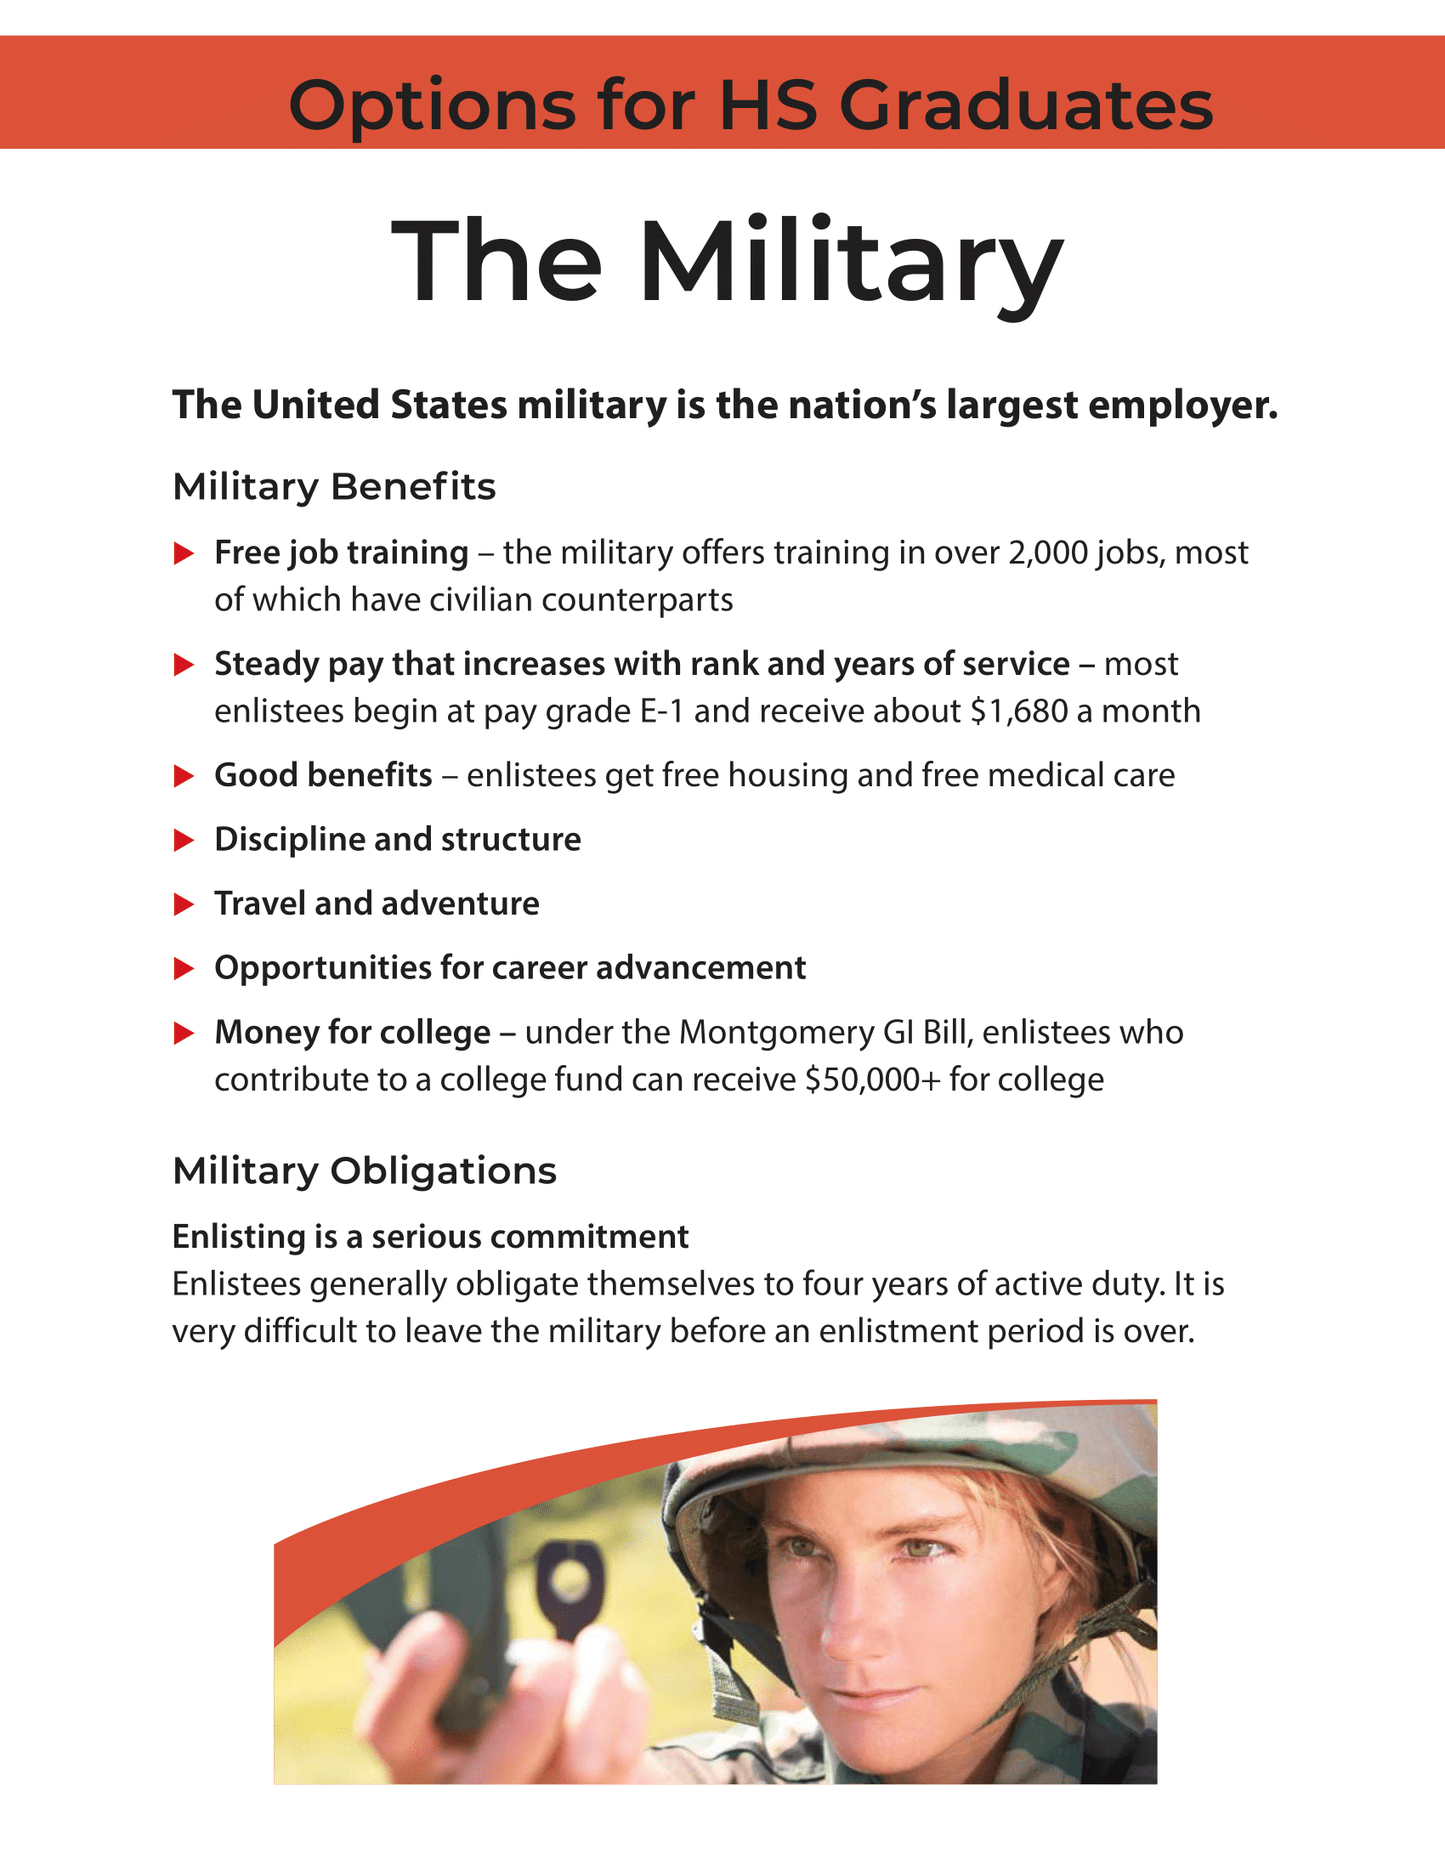 MSHS - Options for HS Graduates - The Military